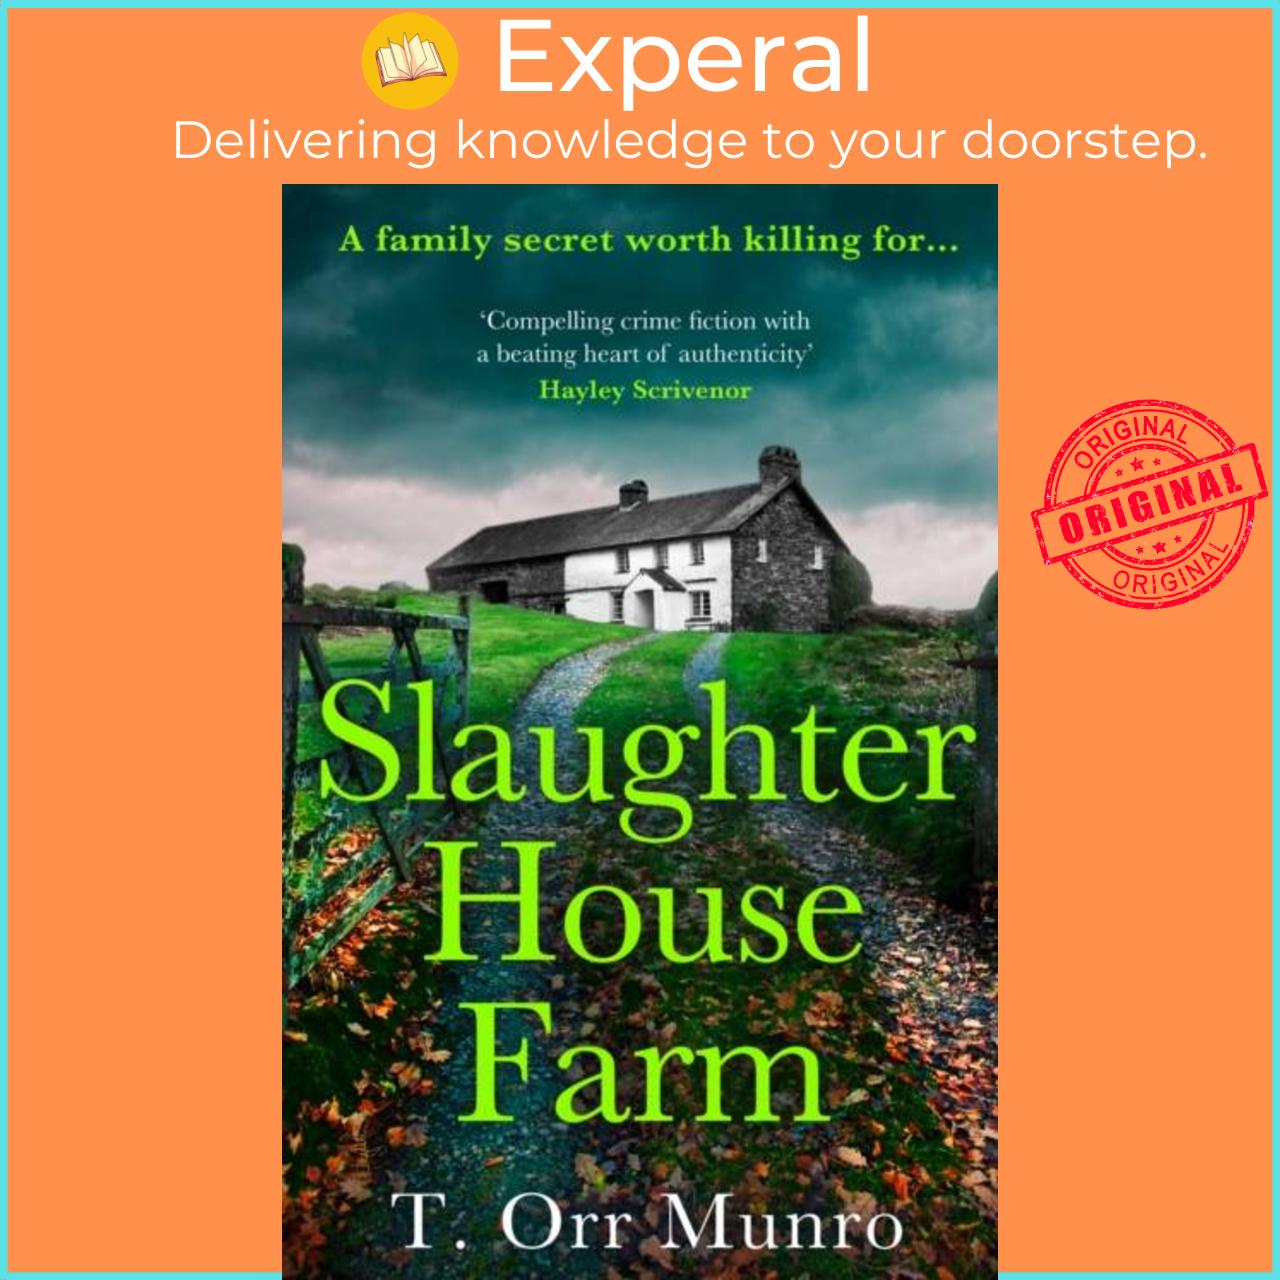 Sách - Slaughterhouse Farm by T. Orr Munro (UK edition, hardcover)